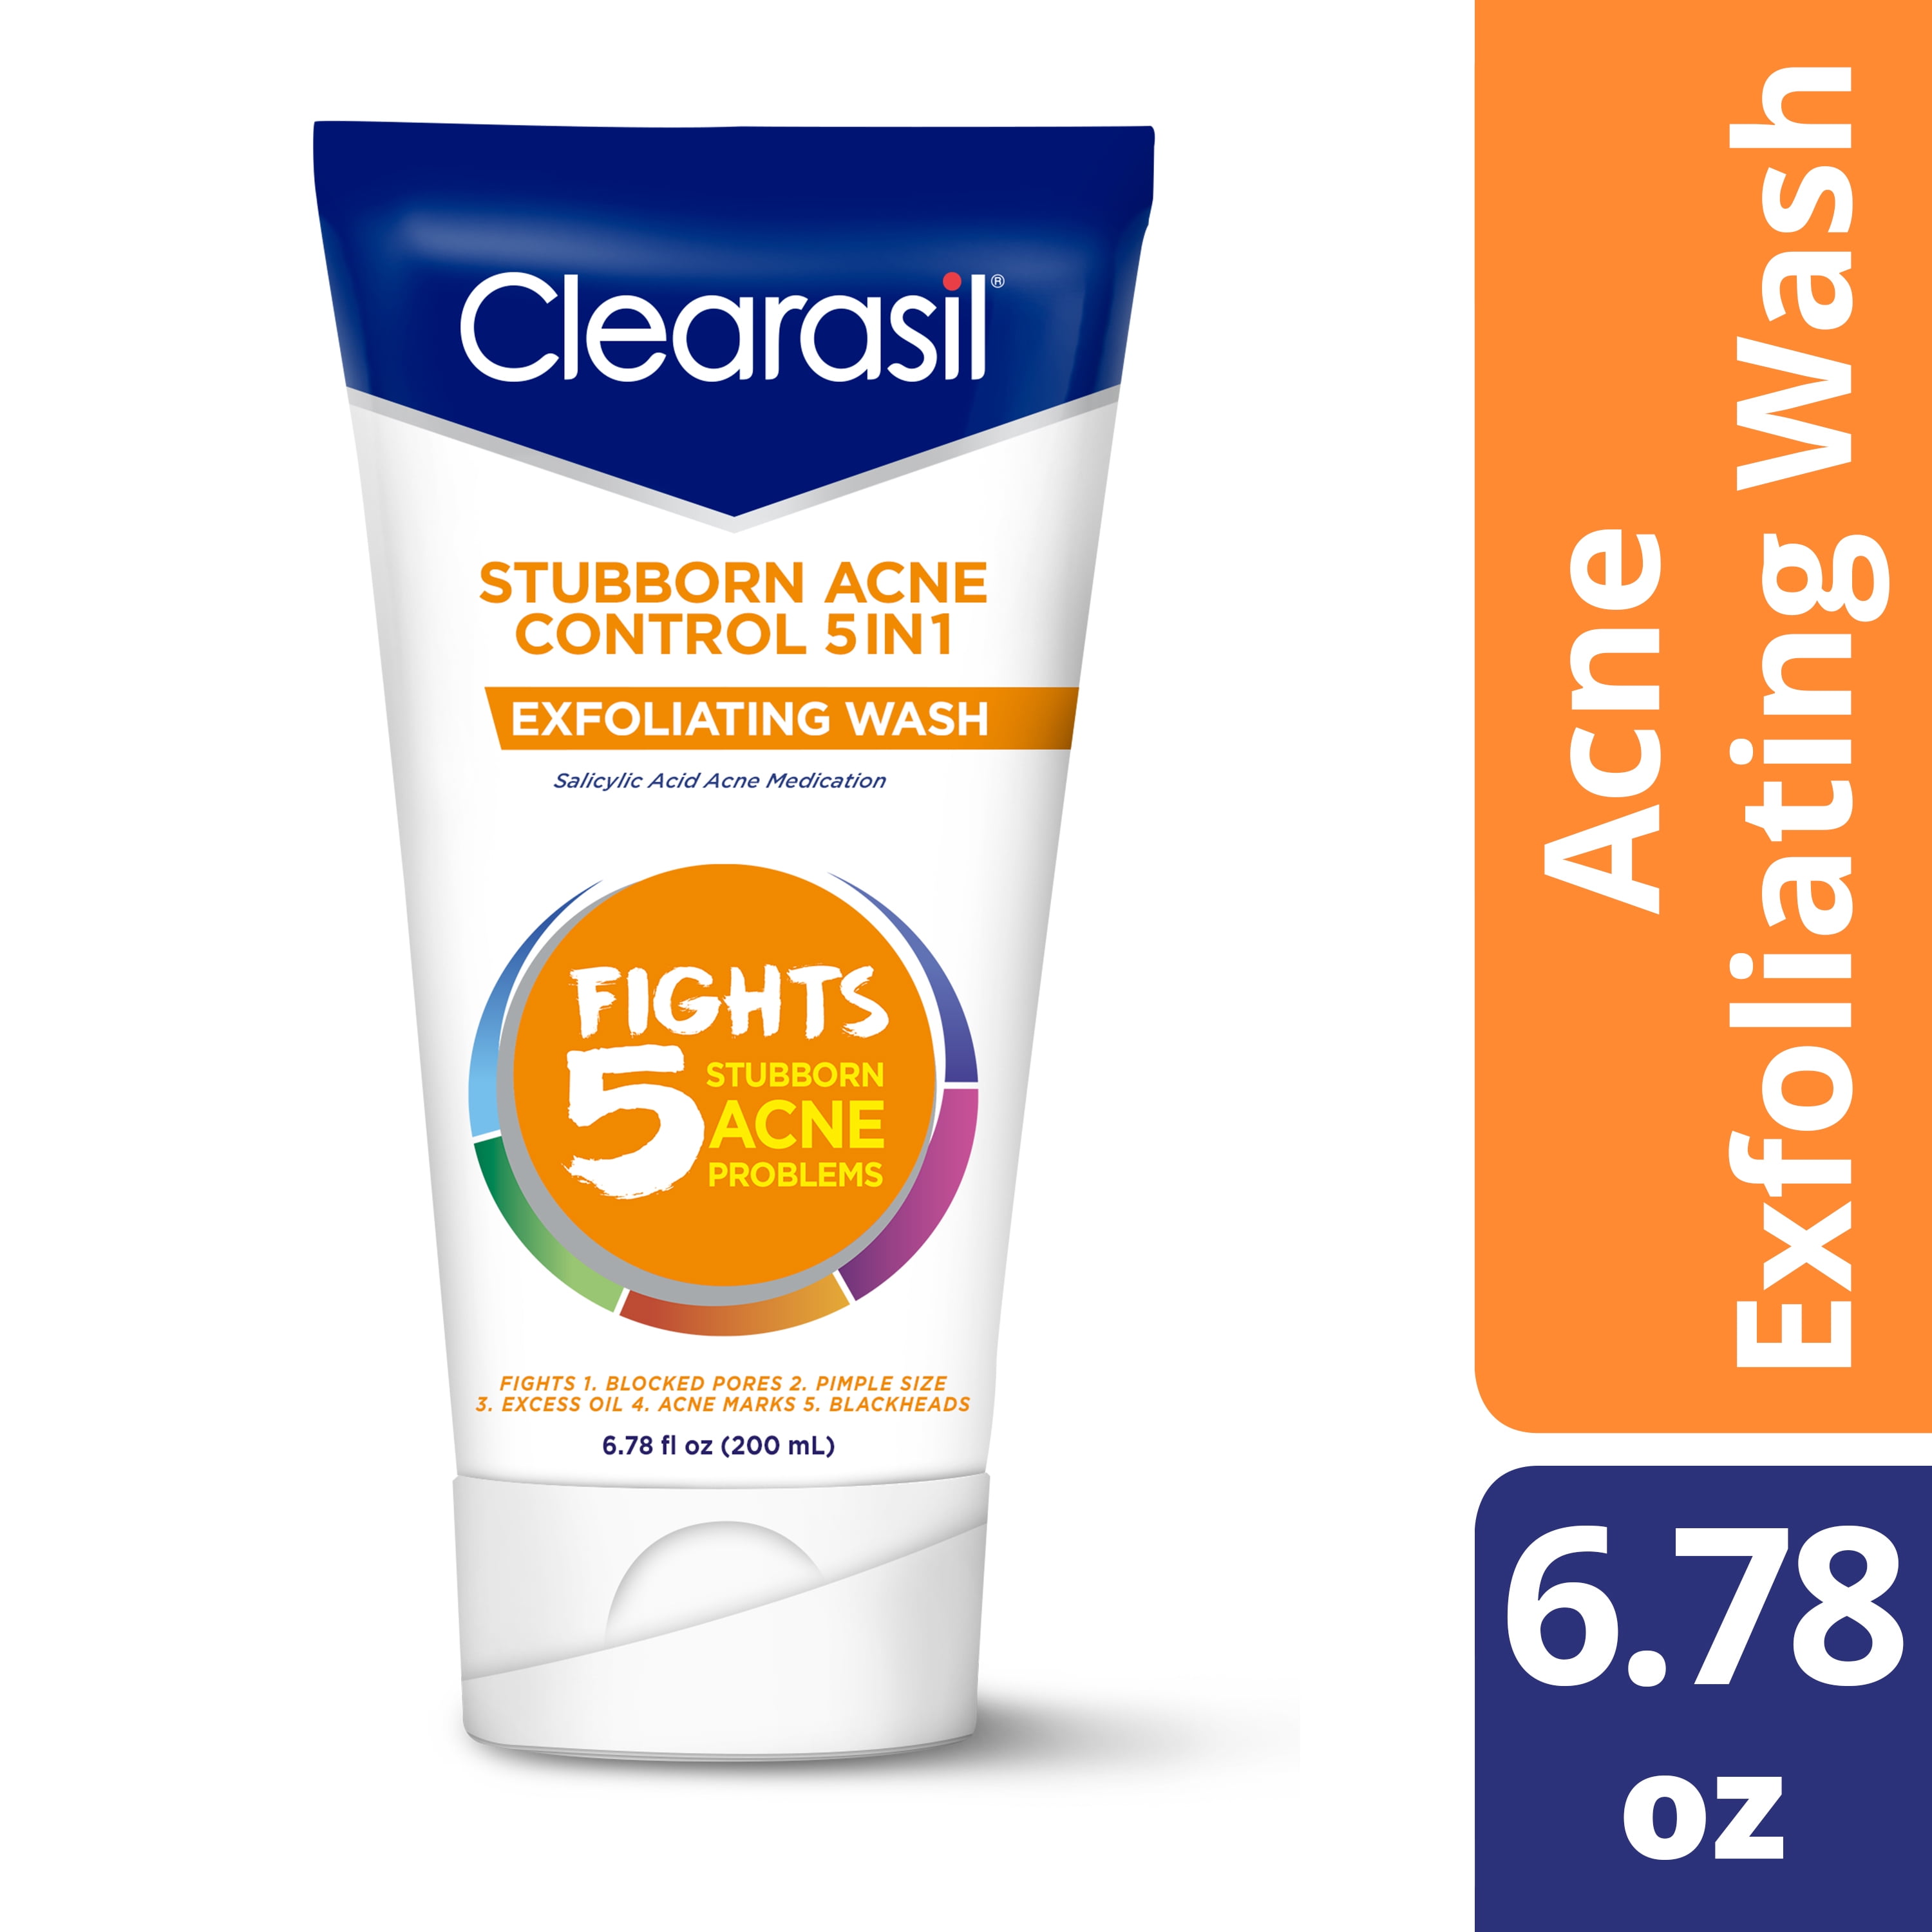 Clearasil Stubborn Acne Control 5in1 Exfoliating Wash 6.78 fl. oz., Reduces Blocked Pores, Pimple Size, Excess Oil, Acne Marks, Blackheads